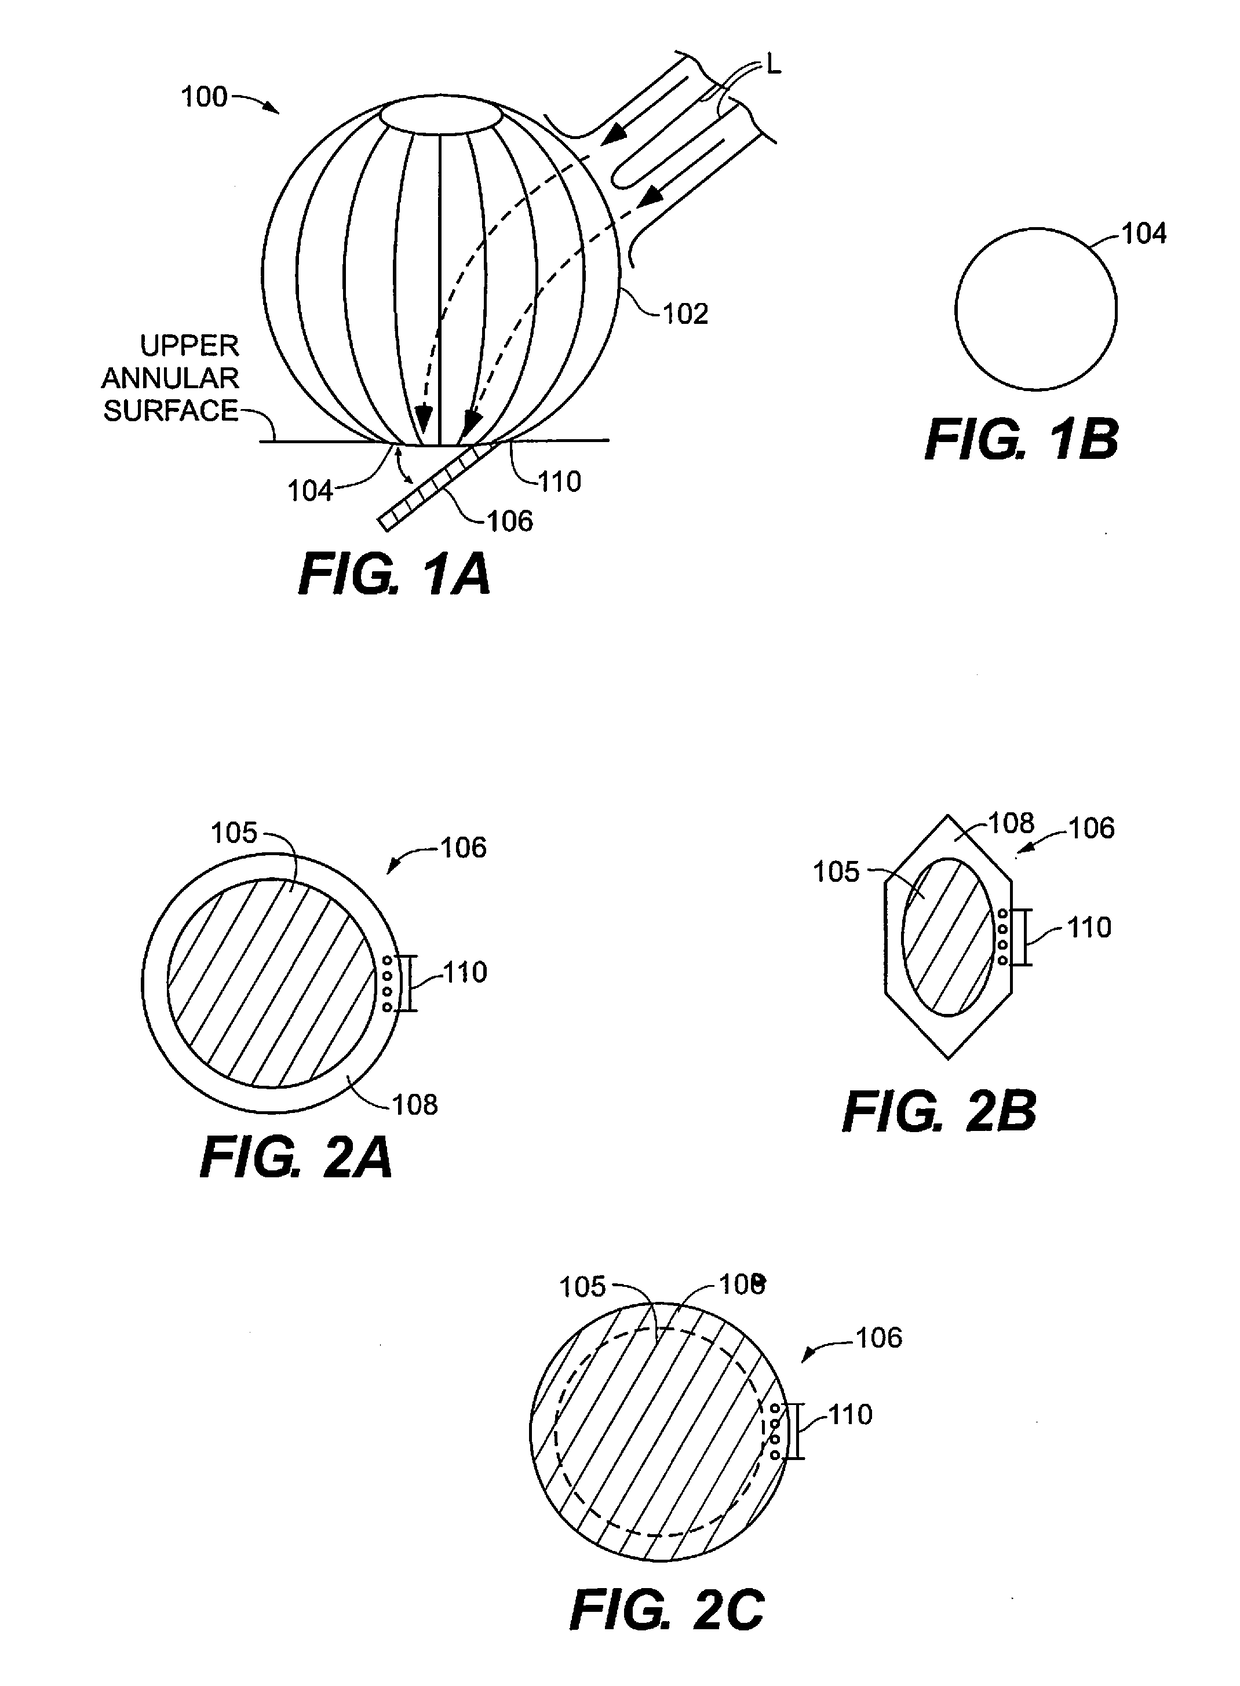 Systems, methods and devices for prosthetic heart valve with single valve leaflet